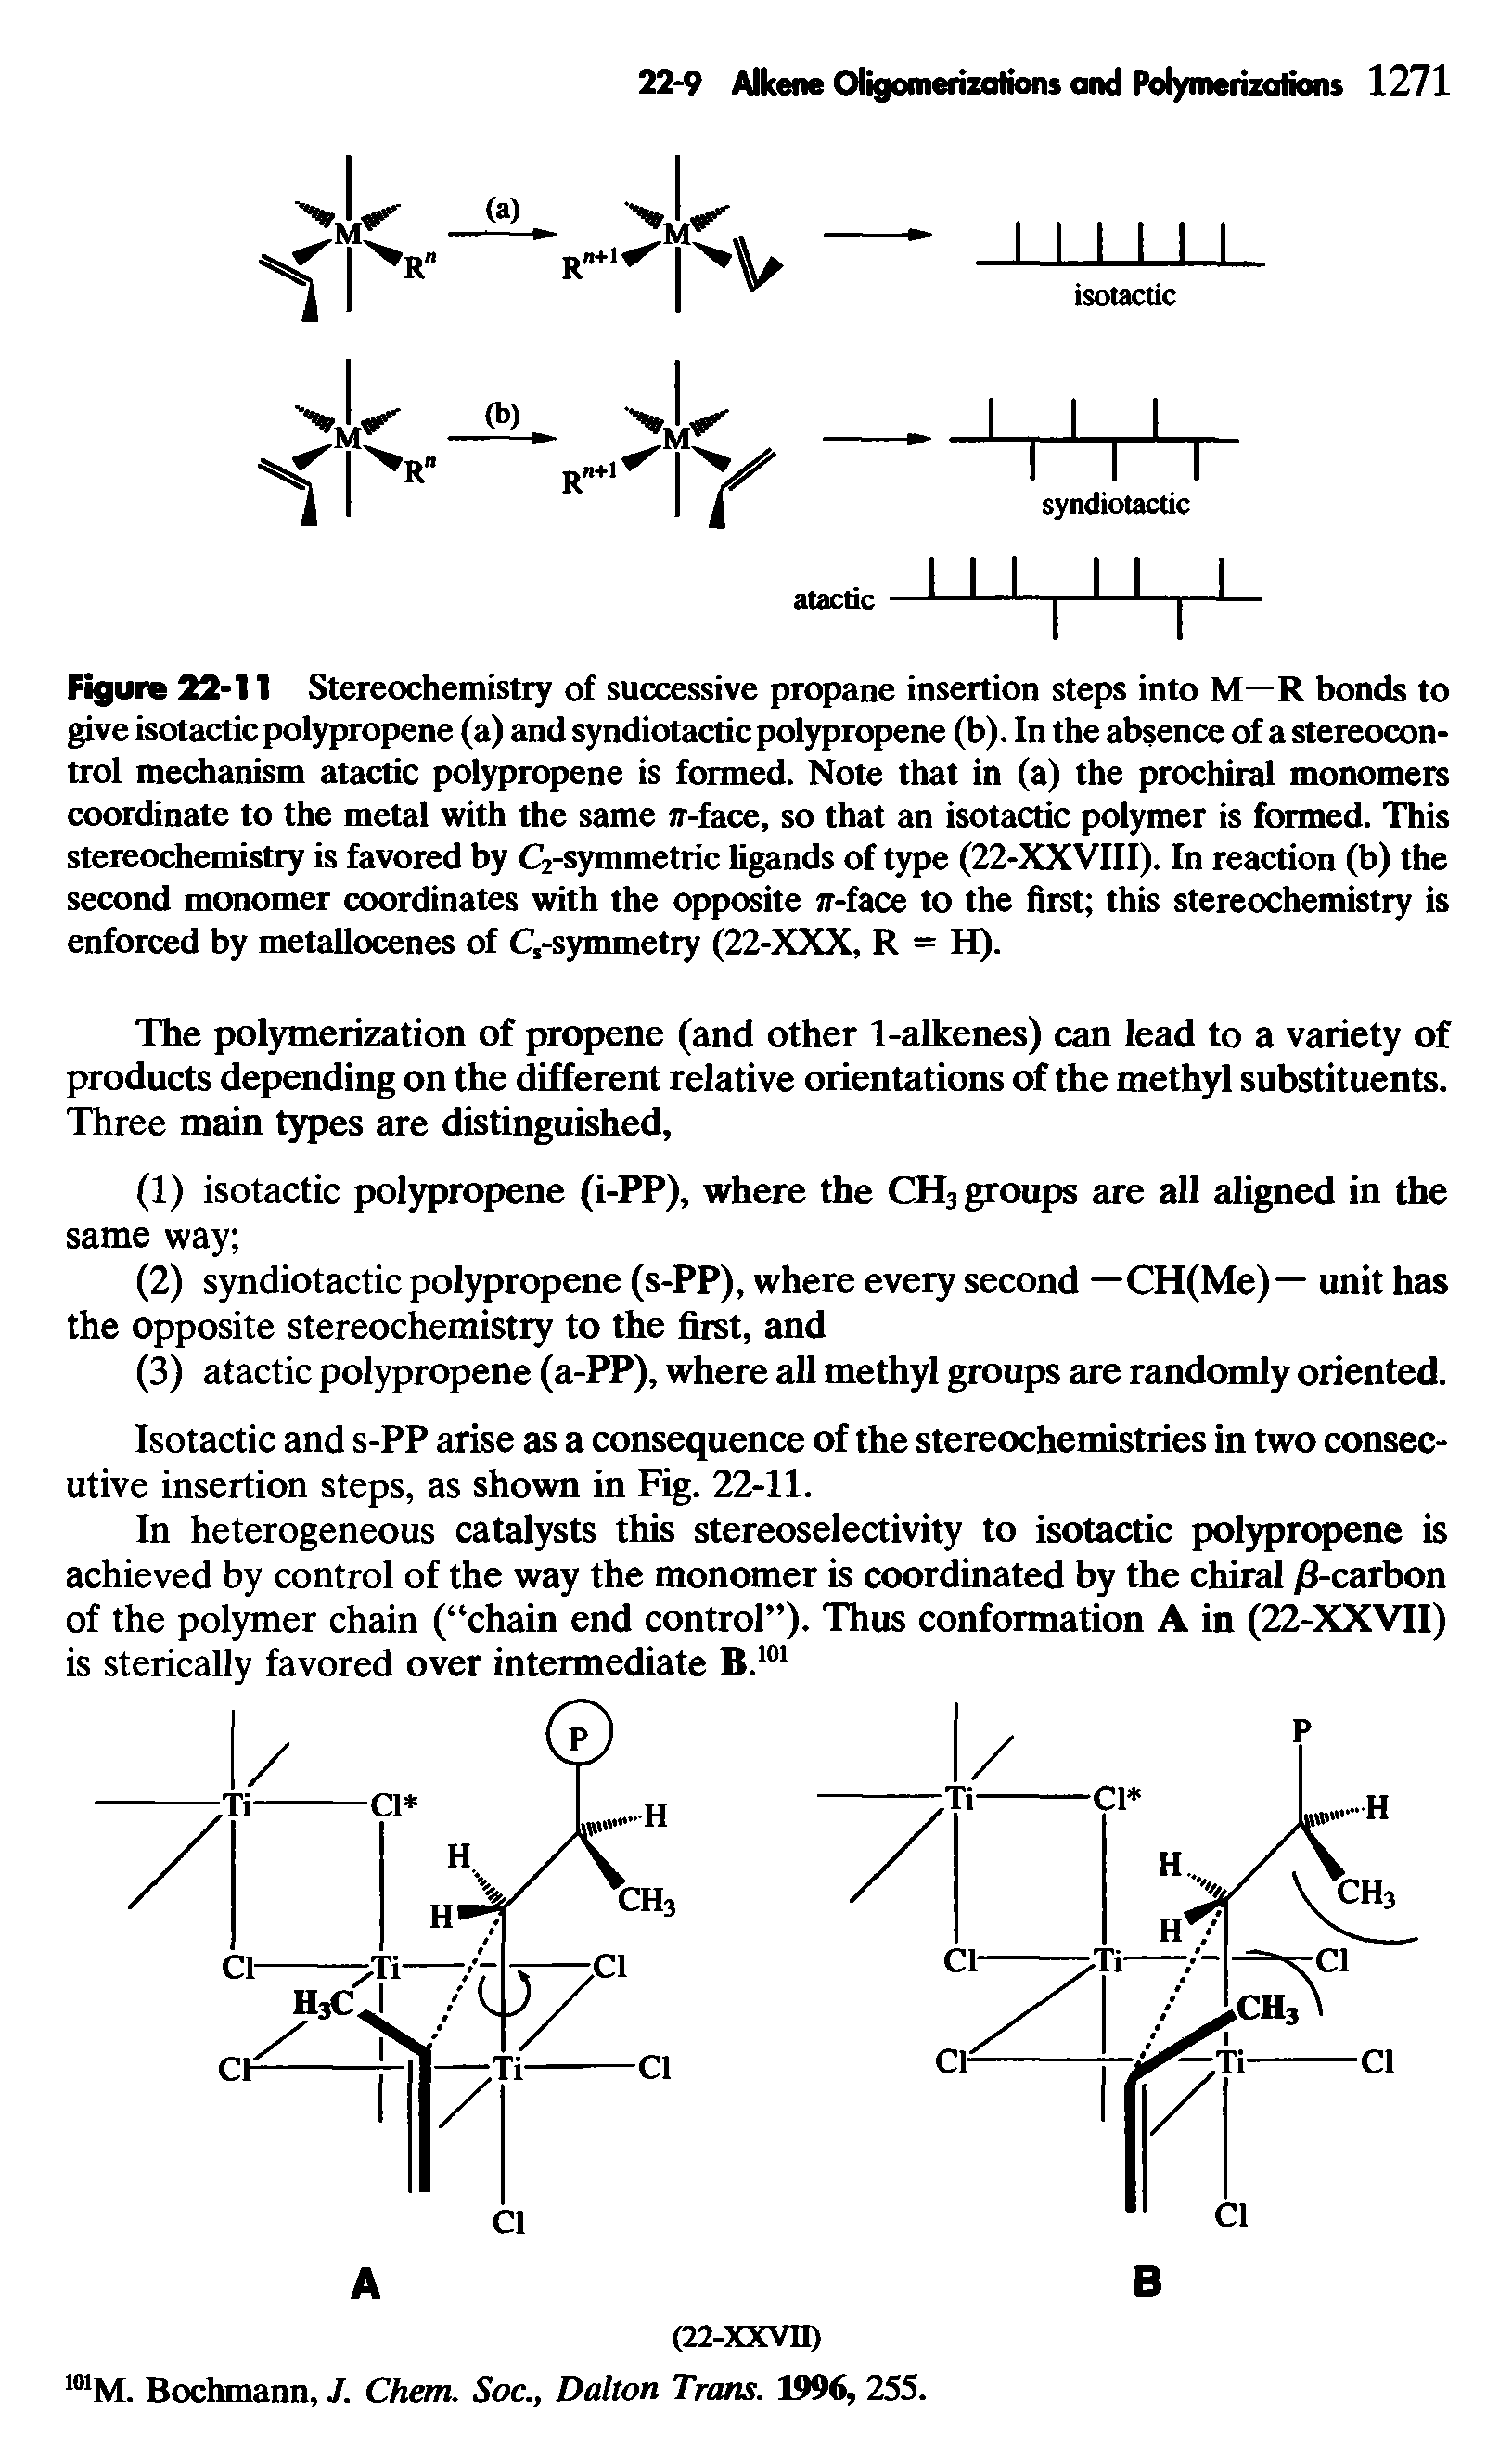 Figure 22-11 Stereochemistry of successive propane insertion steps into M—R bonds to give isotactic polypropene (a) and syndiotactic polypropene (b). In the absence of a stereocontrol mechanism atactic polypropene is formed. Note that in (a) the prochiral monomers coordinate to the metal with the same ff-face, so that an isotactic polymer is formed. This stereochemistry is favored by C2-symmetric ligands of type (22-XXVIII). In reaction (b) the second monomer coordinates with the opposite w-face to the first this stereochemistry is enforced by metallocenes of Cs-symmetry (22-XXX, R = H).